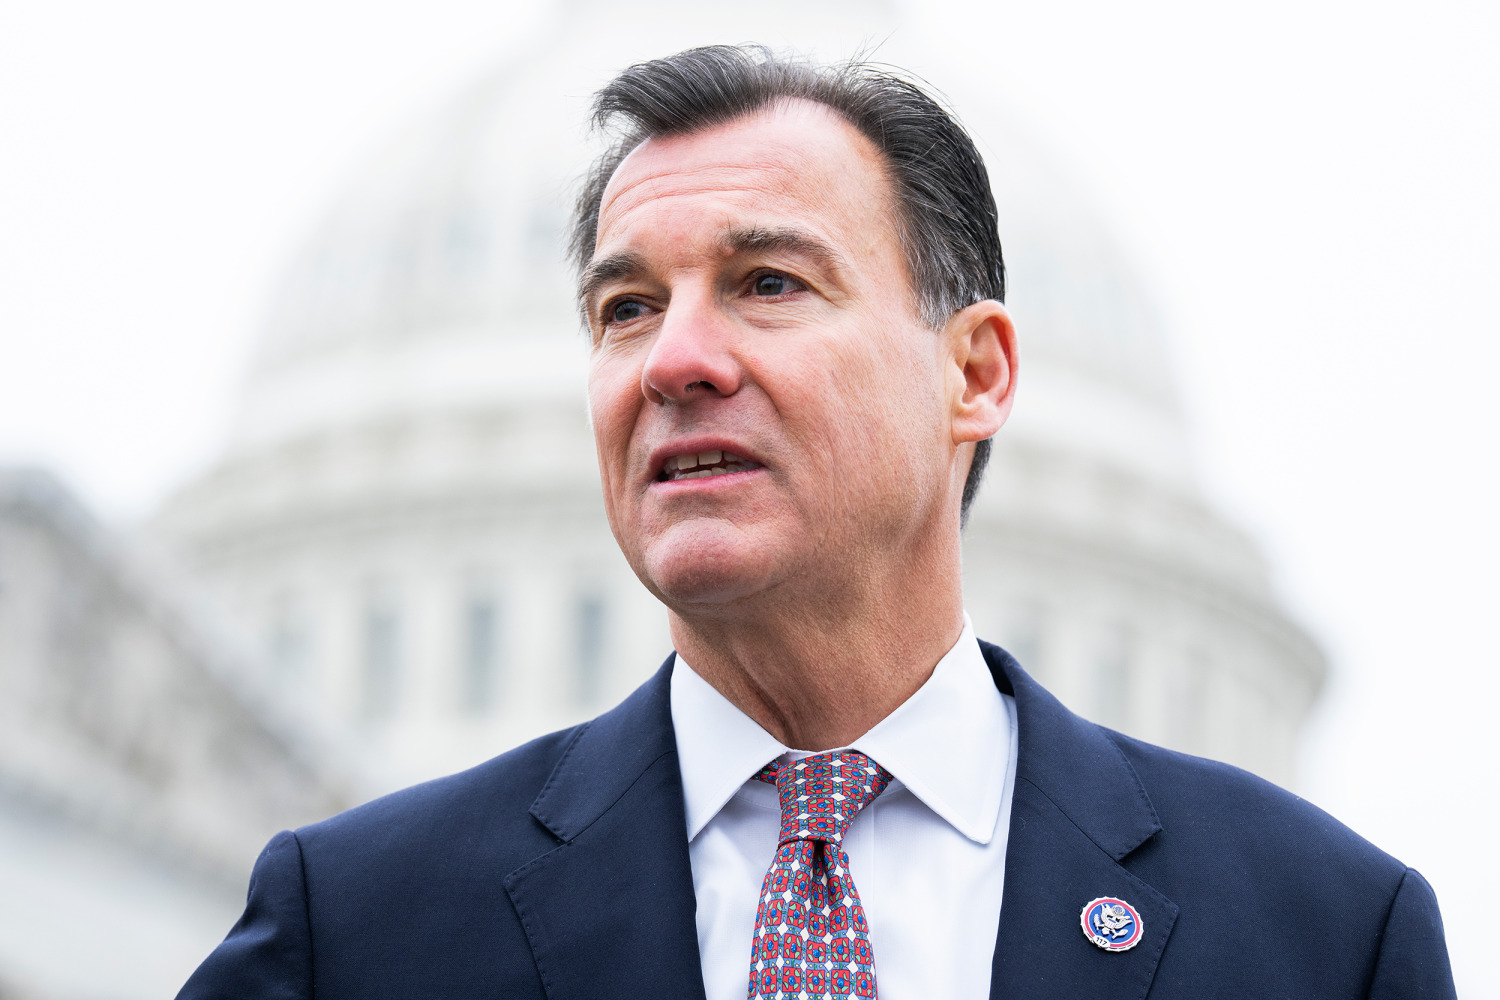 New York Democrats pick Tom Suozzi as their candidate for George